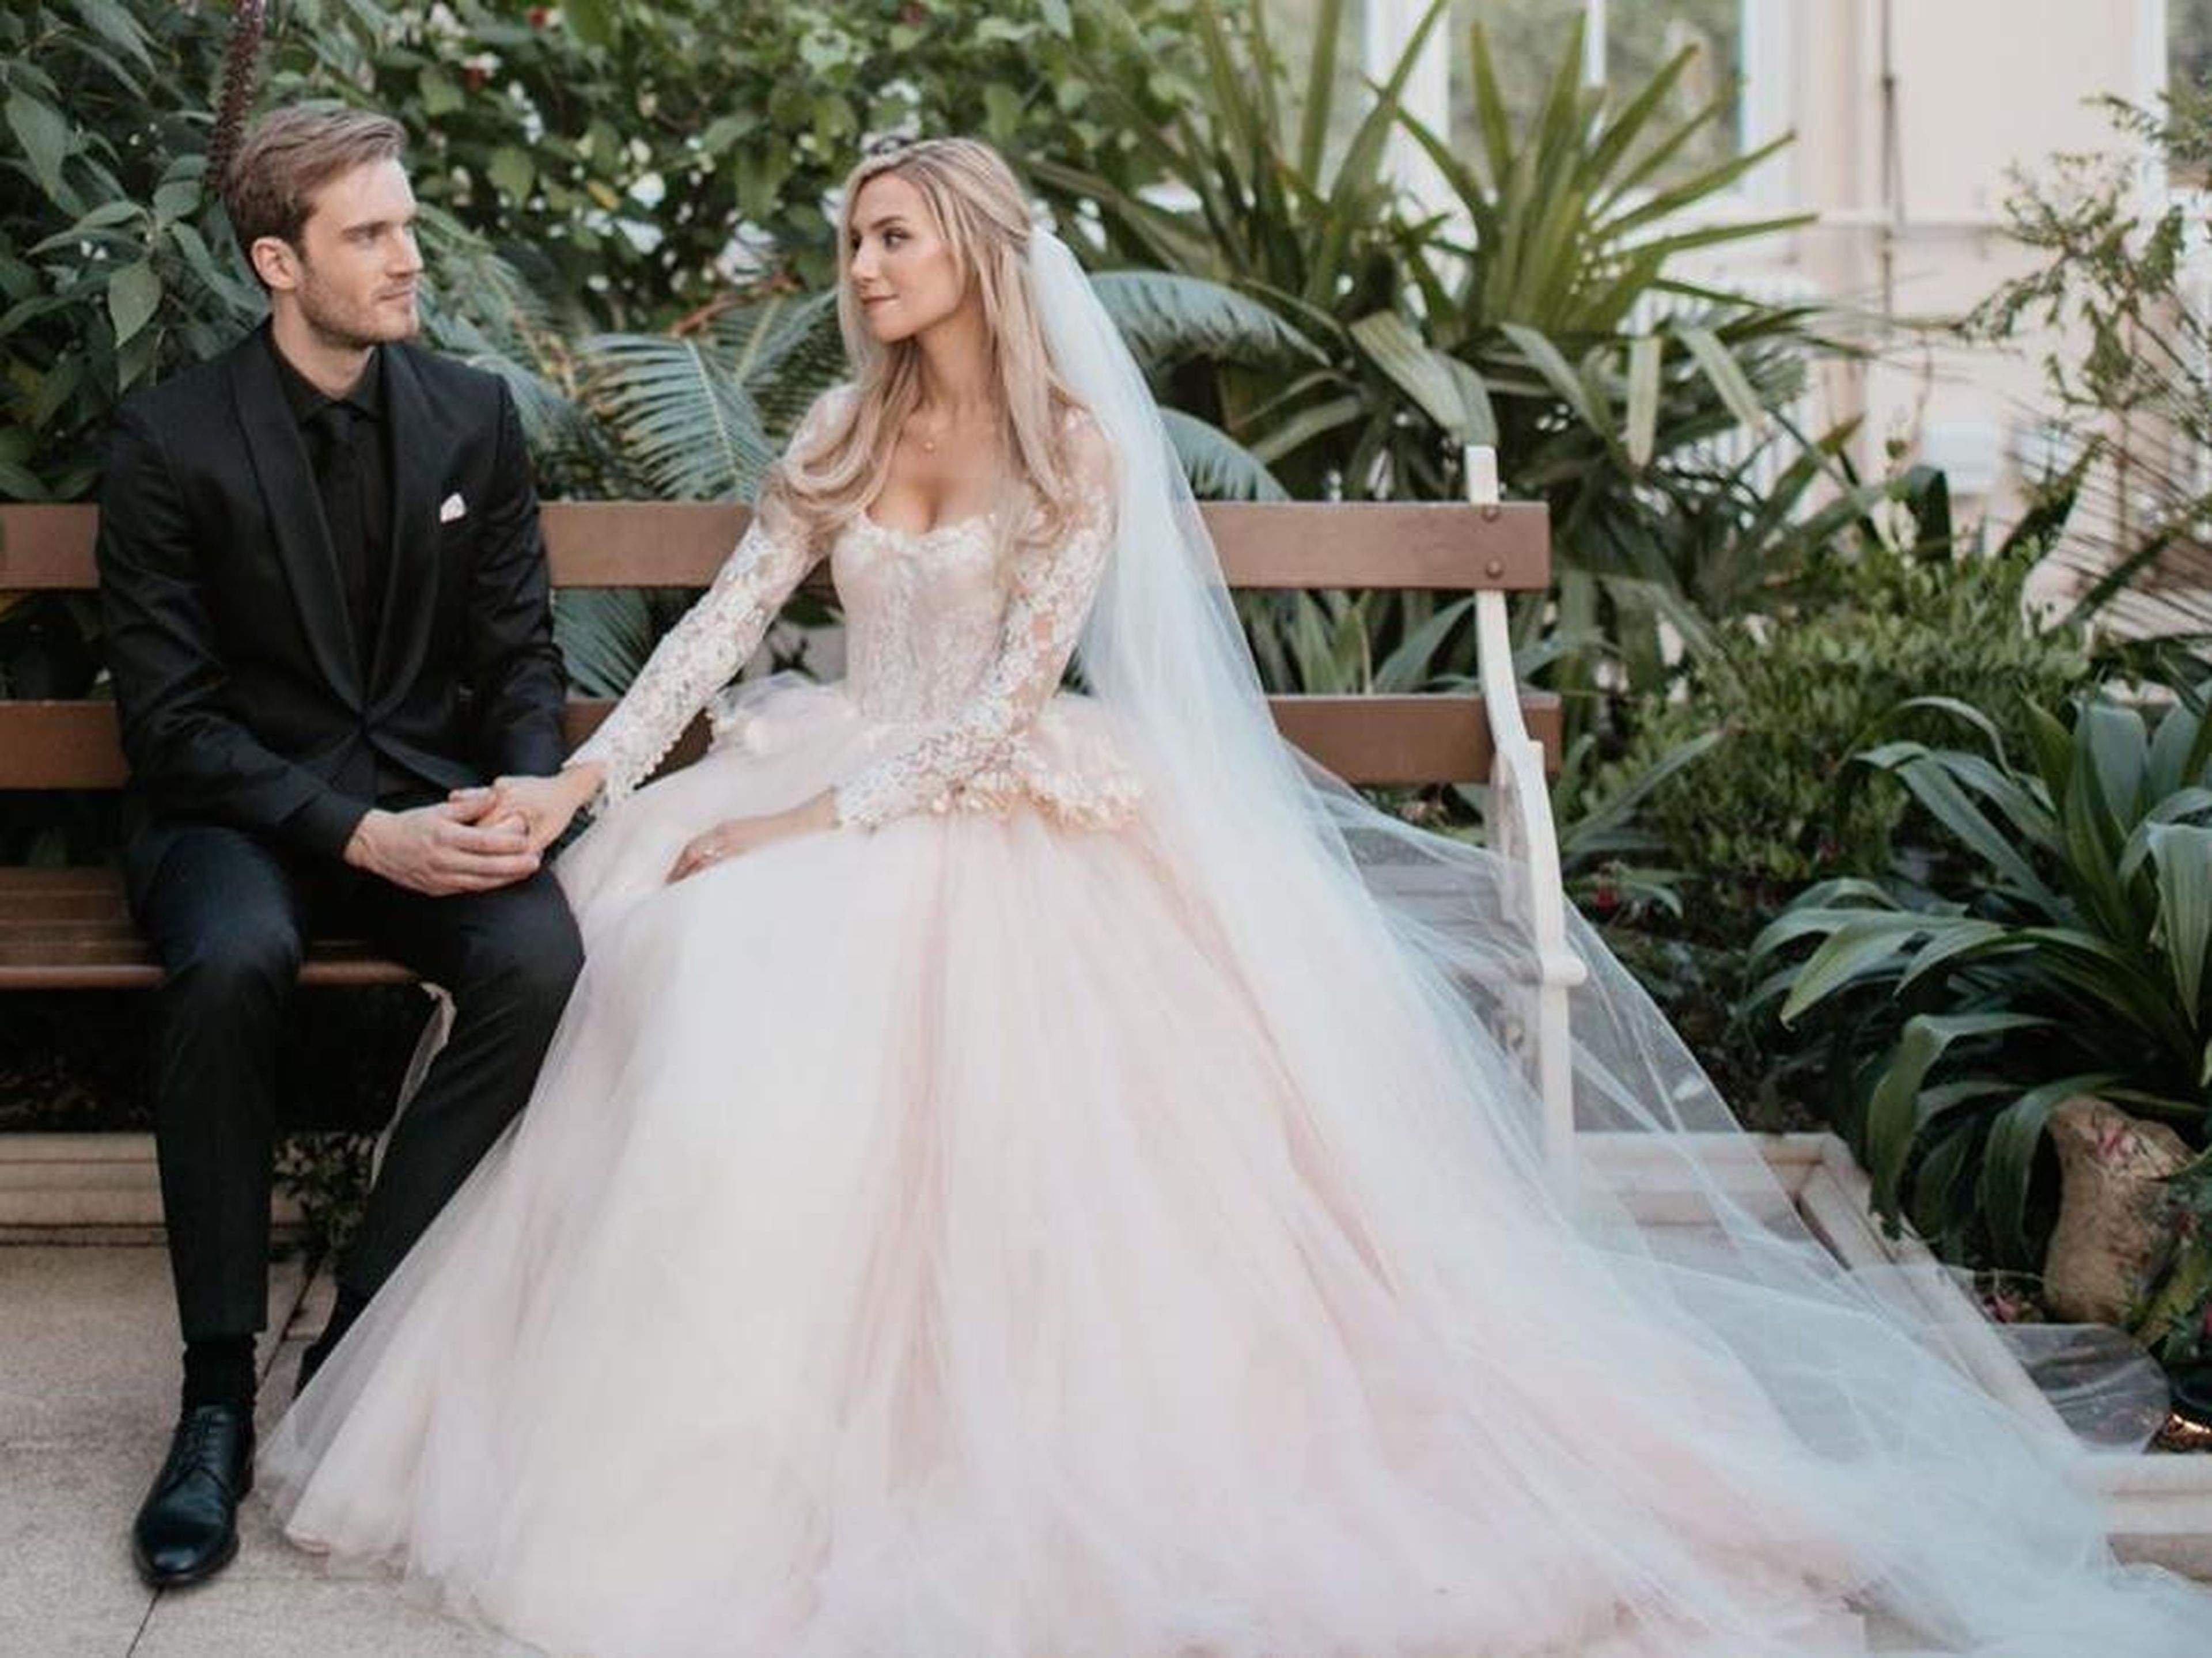 Kjellberg got married on August 19 to Marzia, his girlfriend of nearly eight years. The two got married in London, and some of Kjellberg's YouTube pals were in attendance at the wedding.